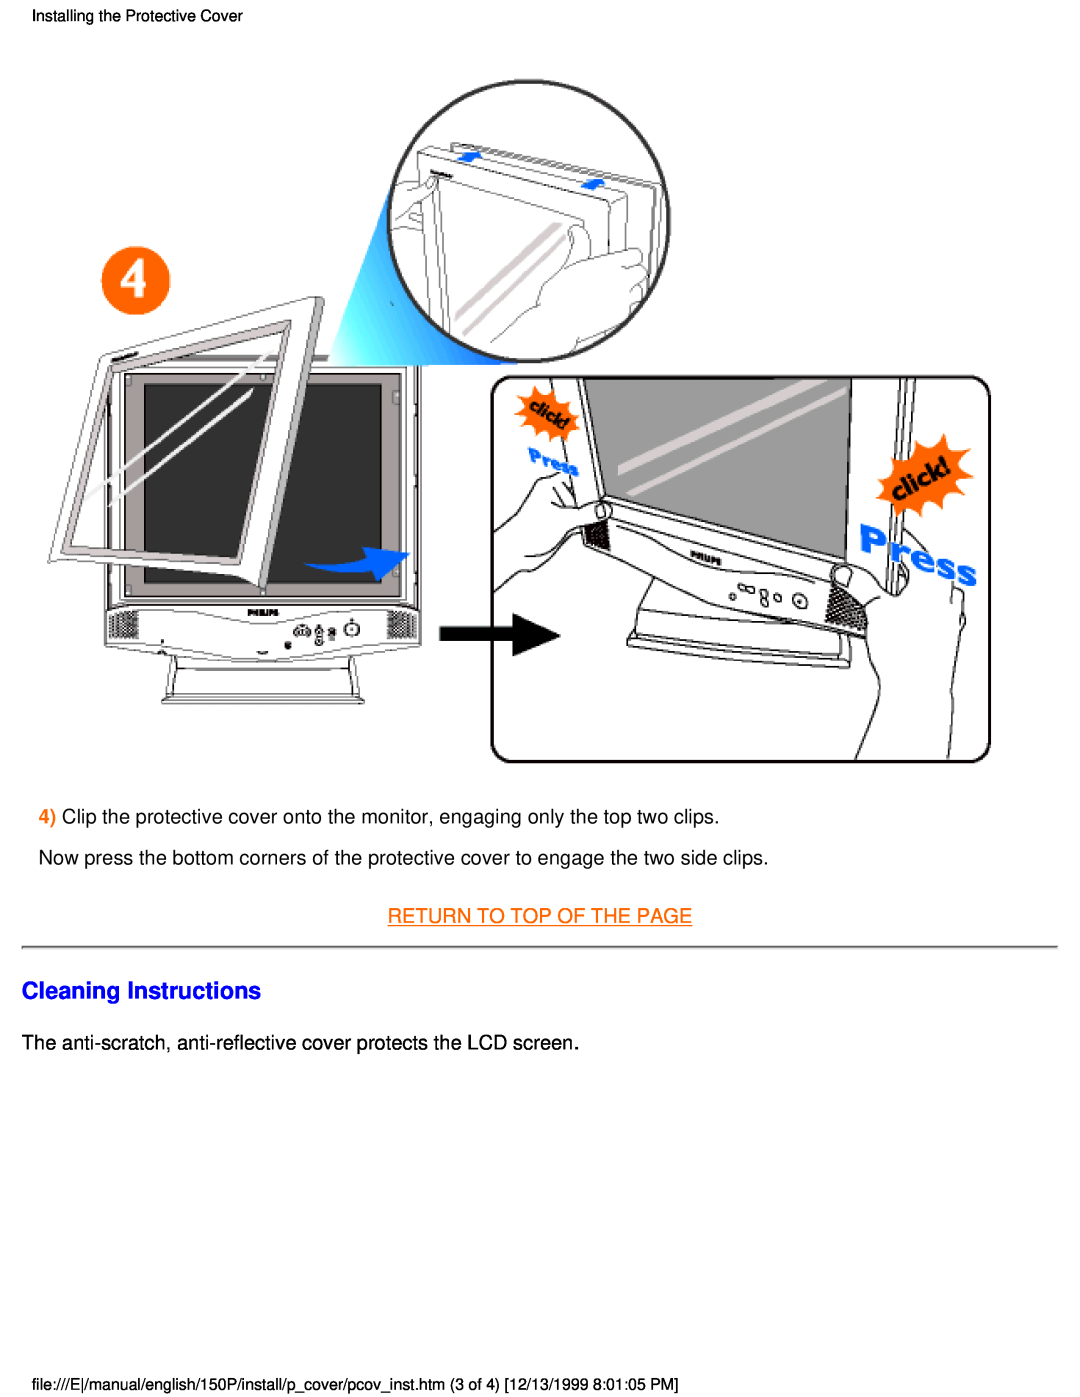 Philips 150P user manual Cleaning Instructions, Return To Top Of The Page, Installing the Protective Cover 